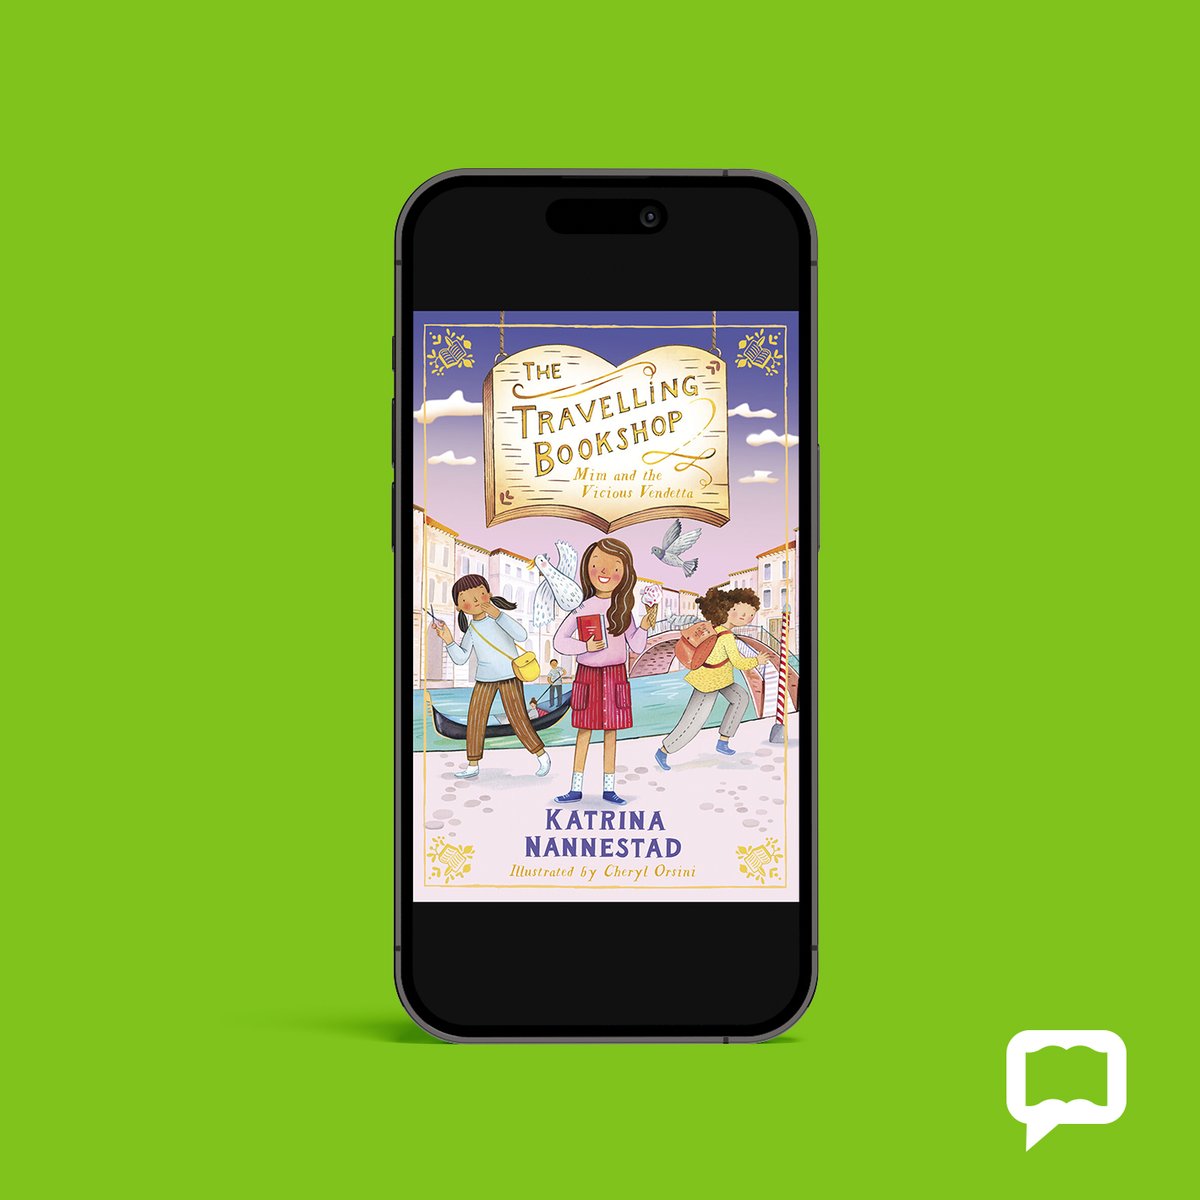 Join Mim on a whimsical adventure through Venice in Mim and the Vicious Vendetta by award-winning author Katrina Nannestad, where books hold the key to ending a feuding family saga. Read on BorrowBox now! @ReadABCBooks